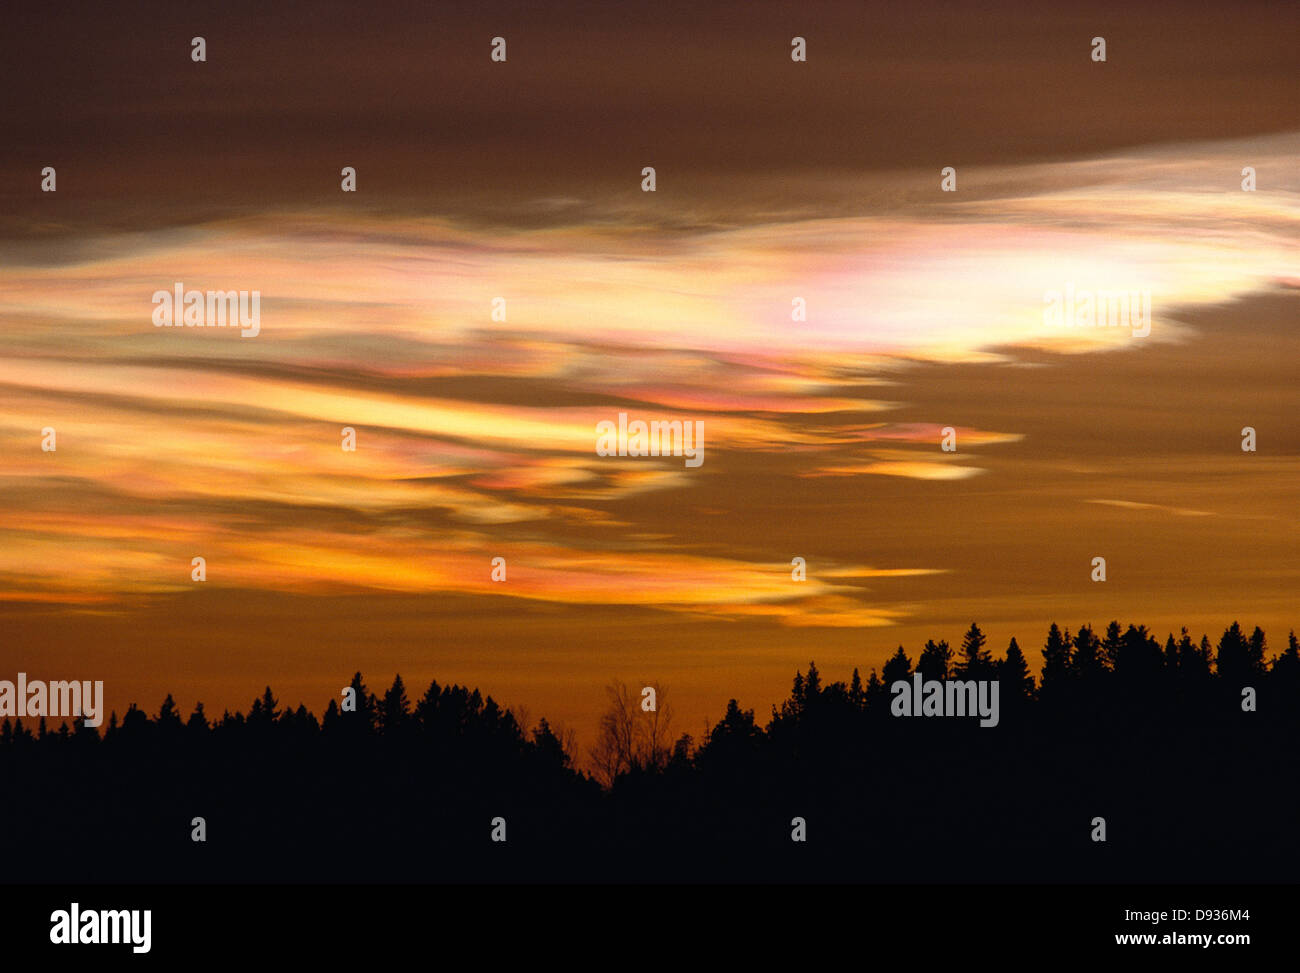 Polar stratospheric clouds over forest. Stock Photo